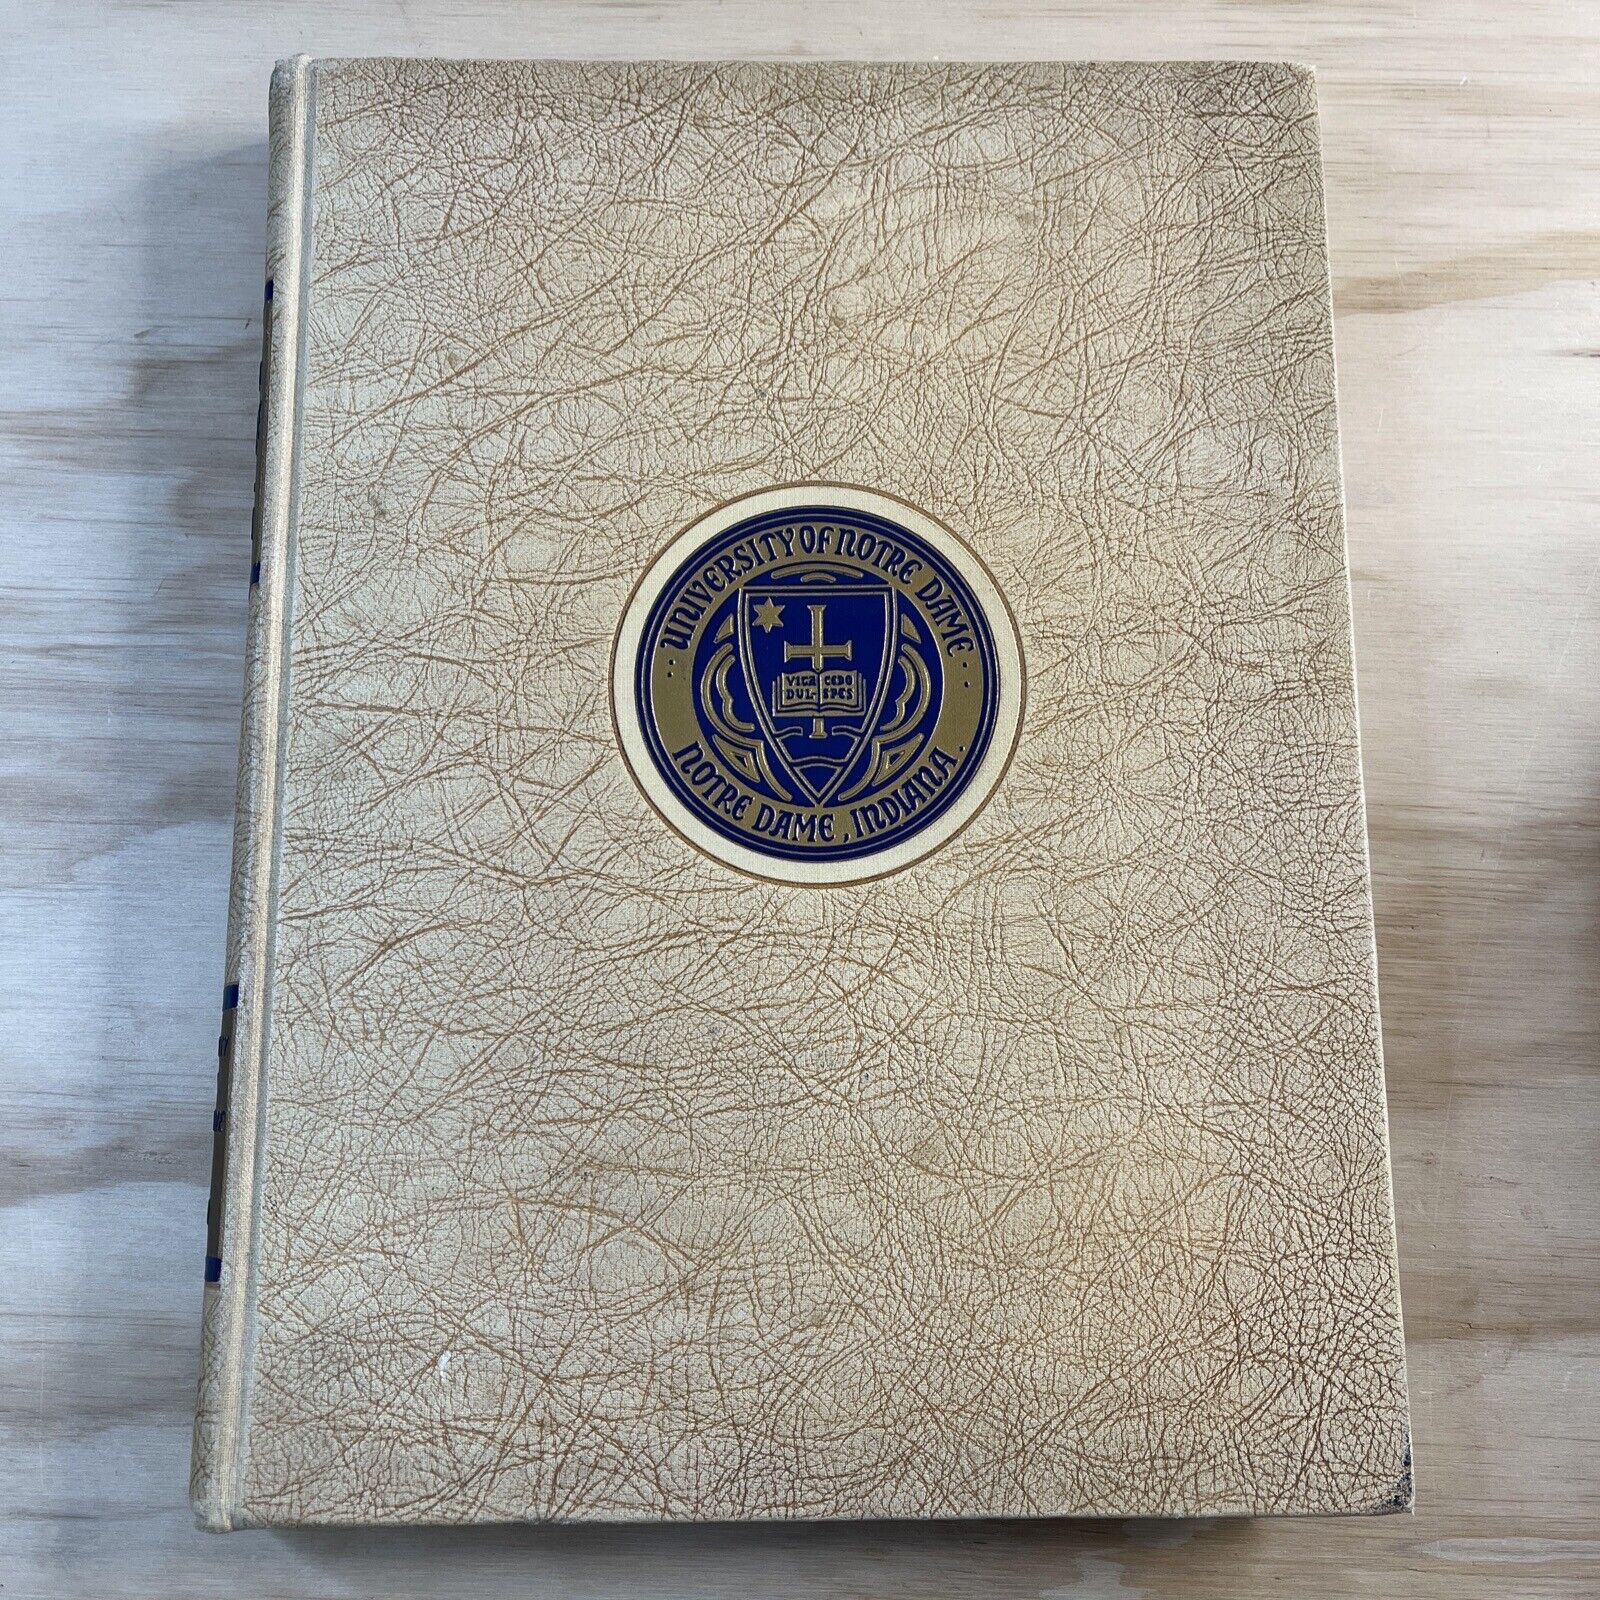 1949 University of Notre Dame The Dome Yearbook Vol. 40 Notre Dame, Indiana